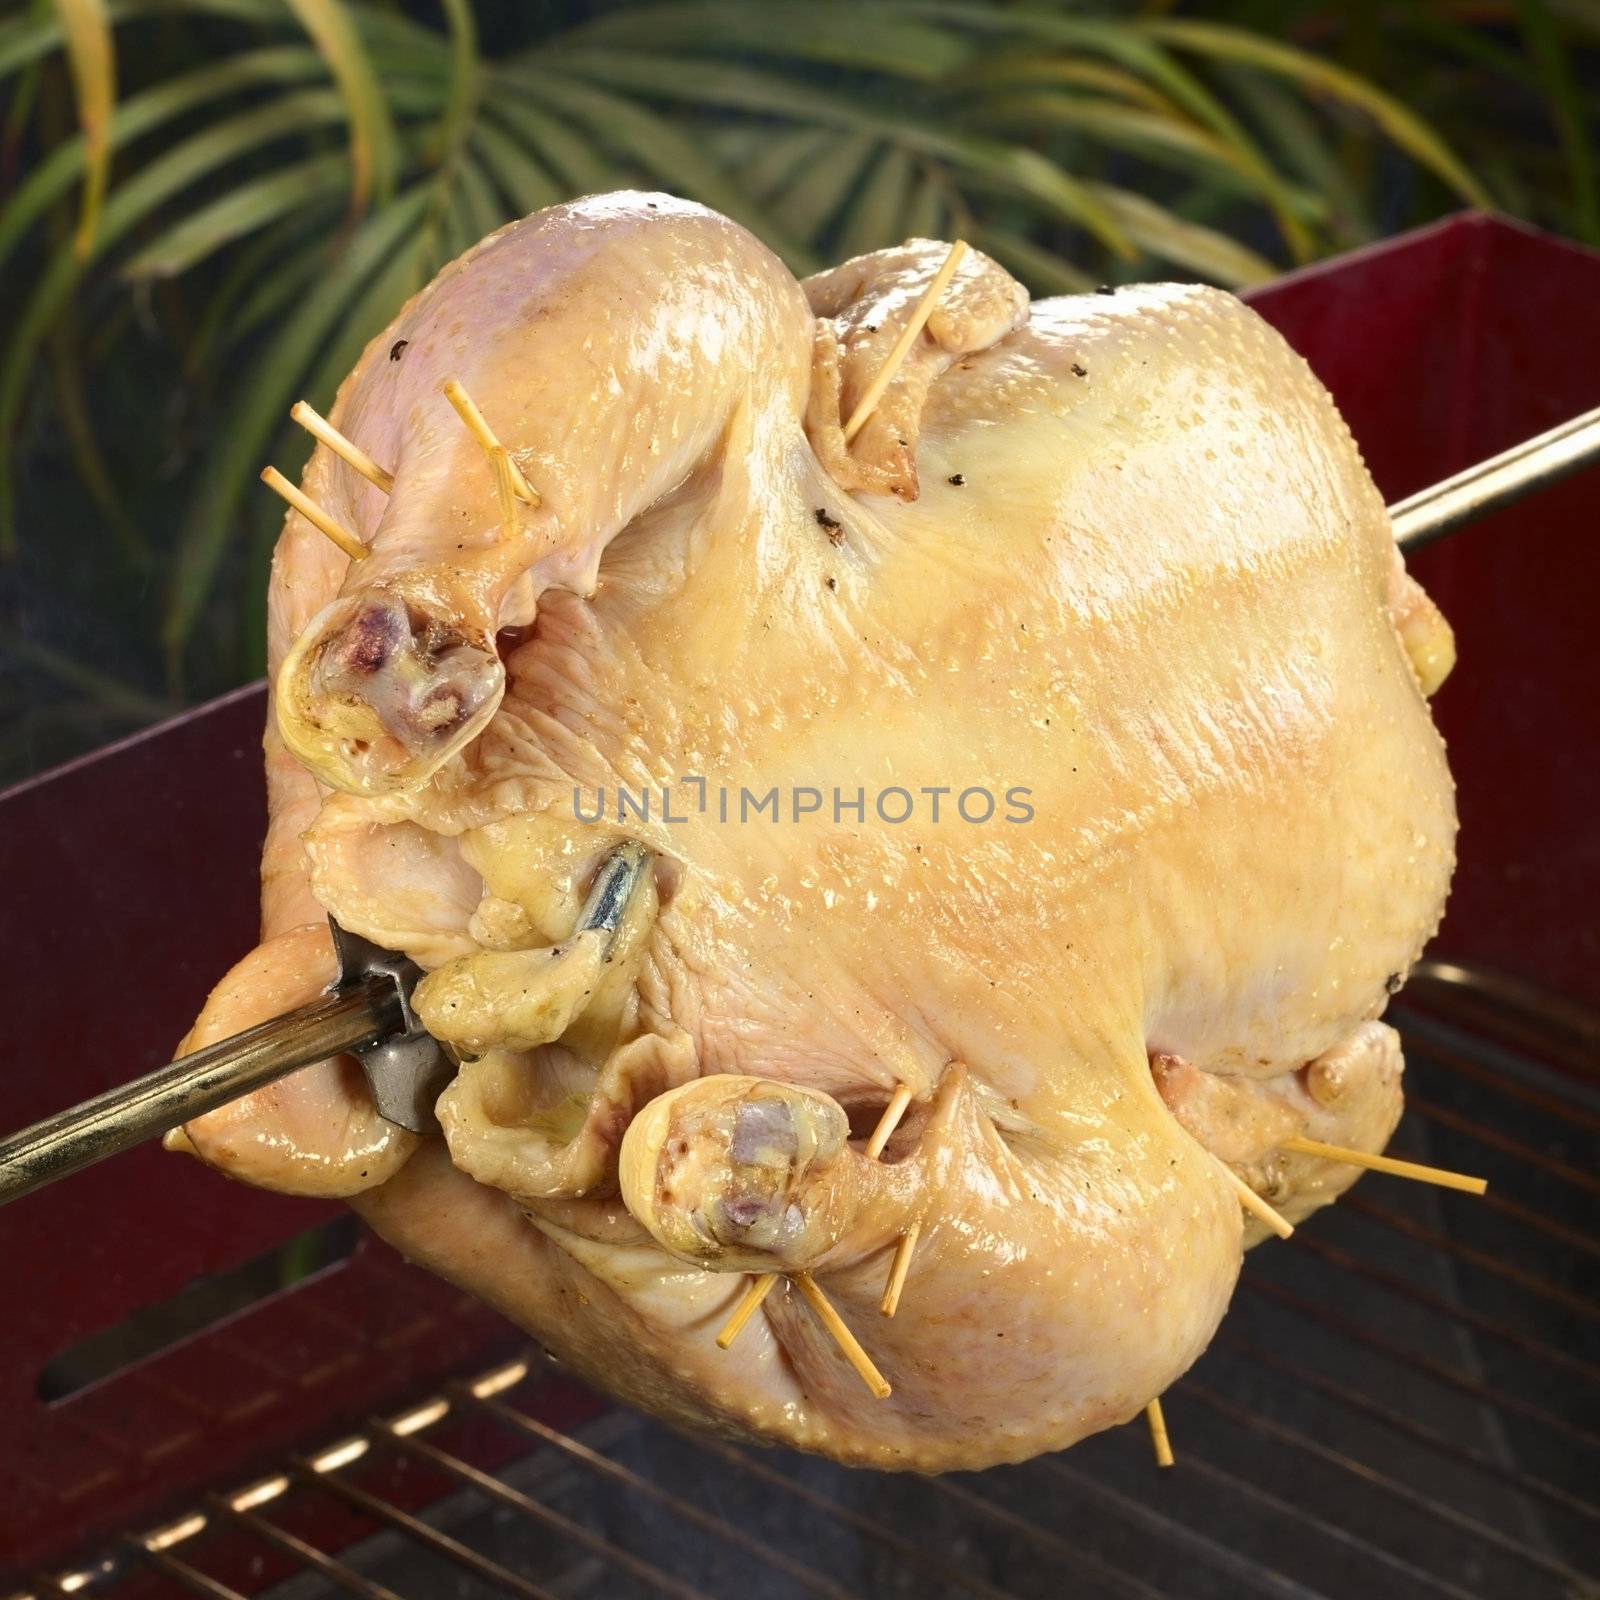 Whole chicken being grilled on spit over a charcoal barbecue (Selective Focus, Focus on the legs of the chicken)